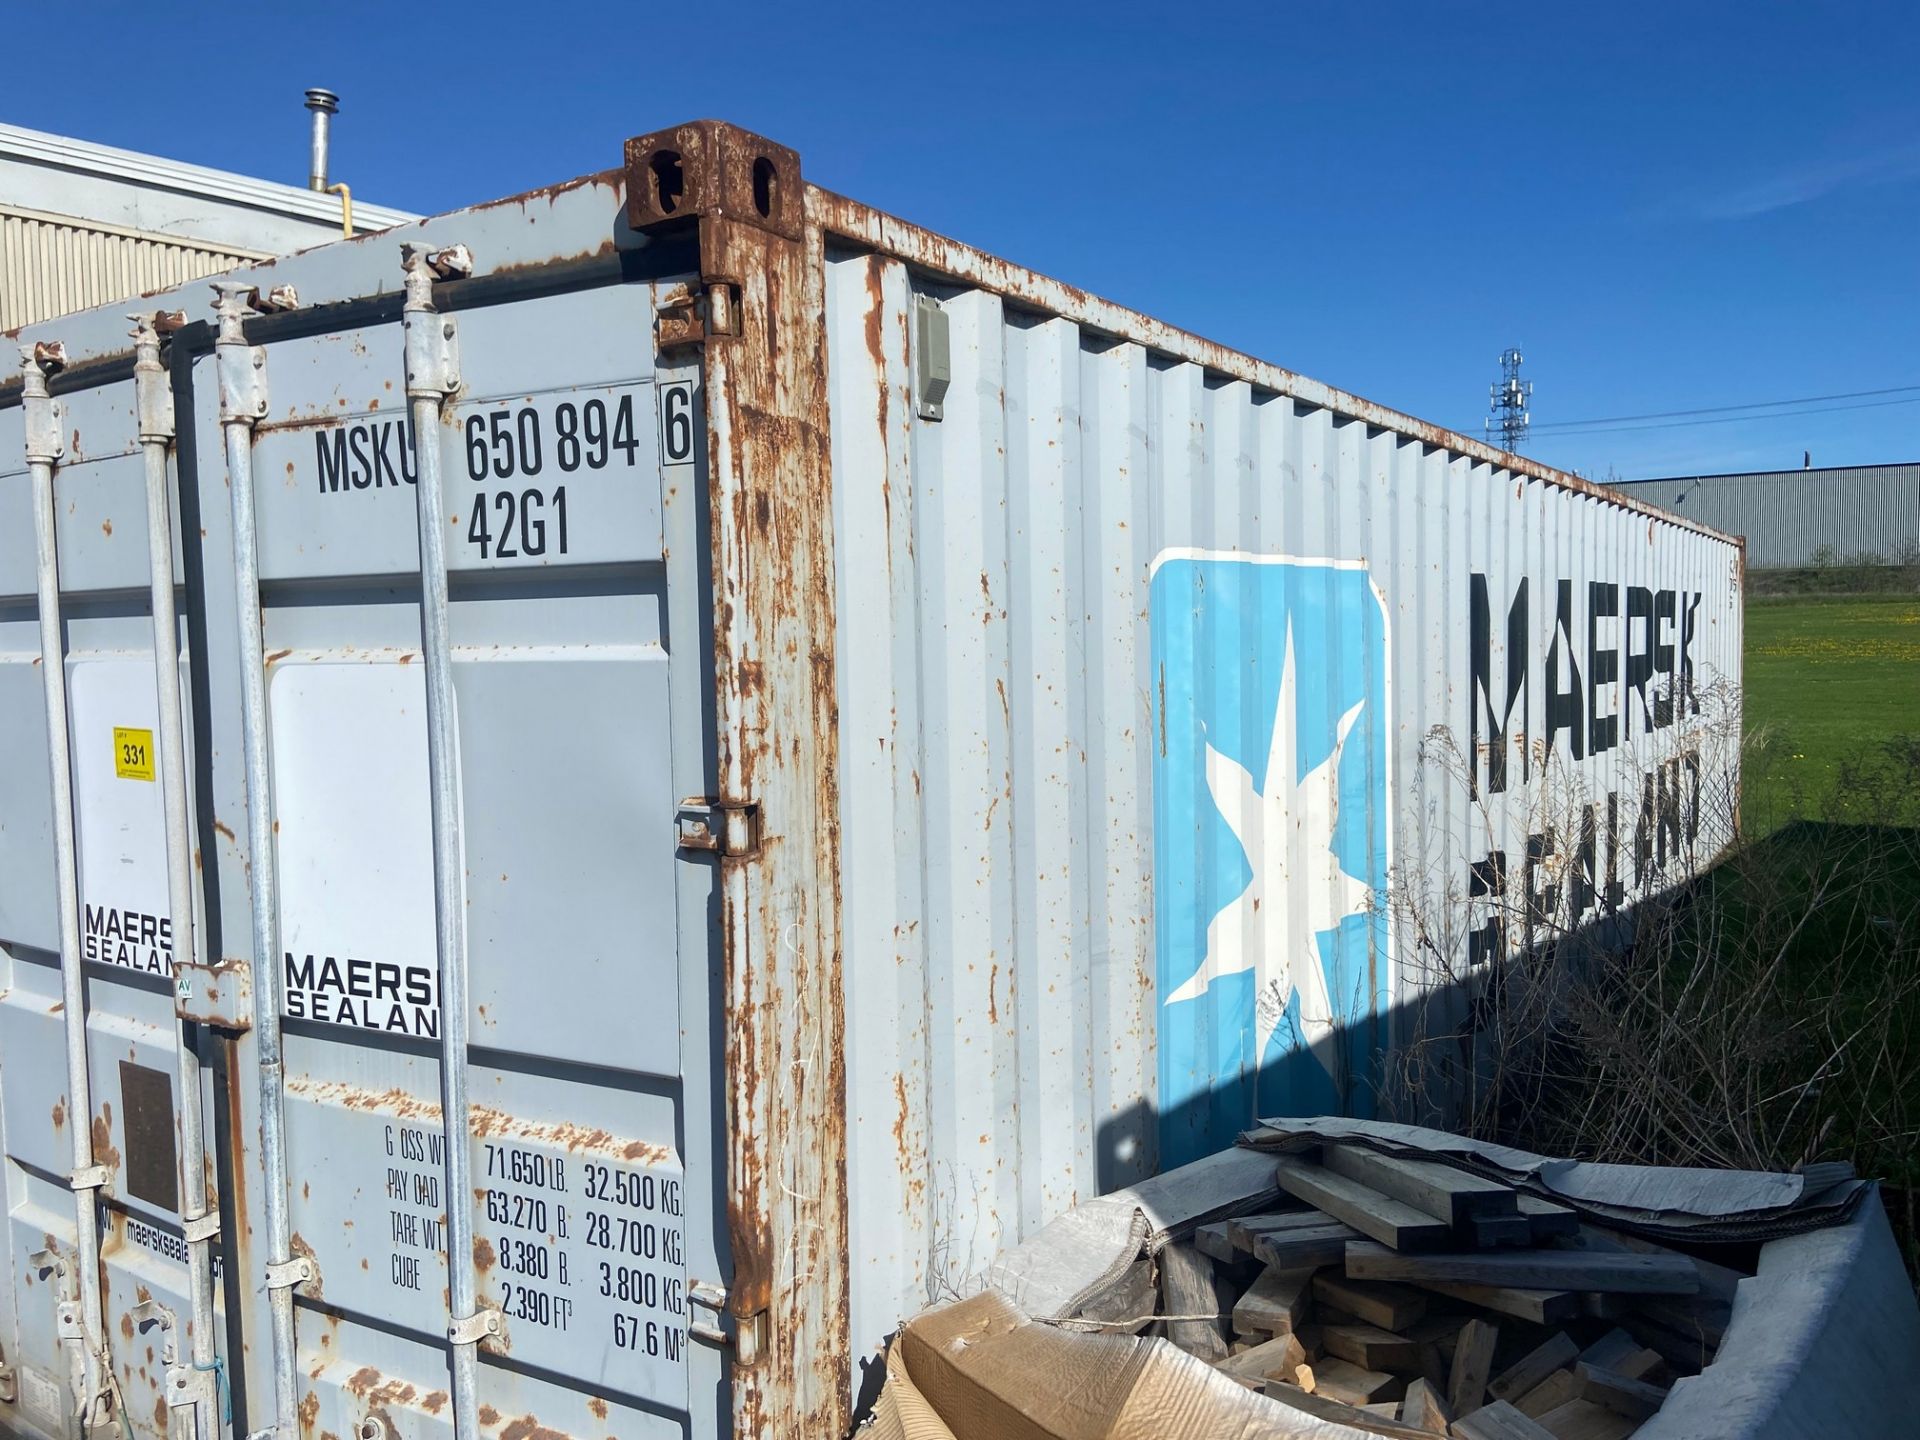 40' LONG SHIPPING CONTAINER - Image 2 of 3